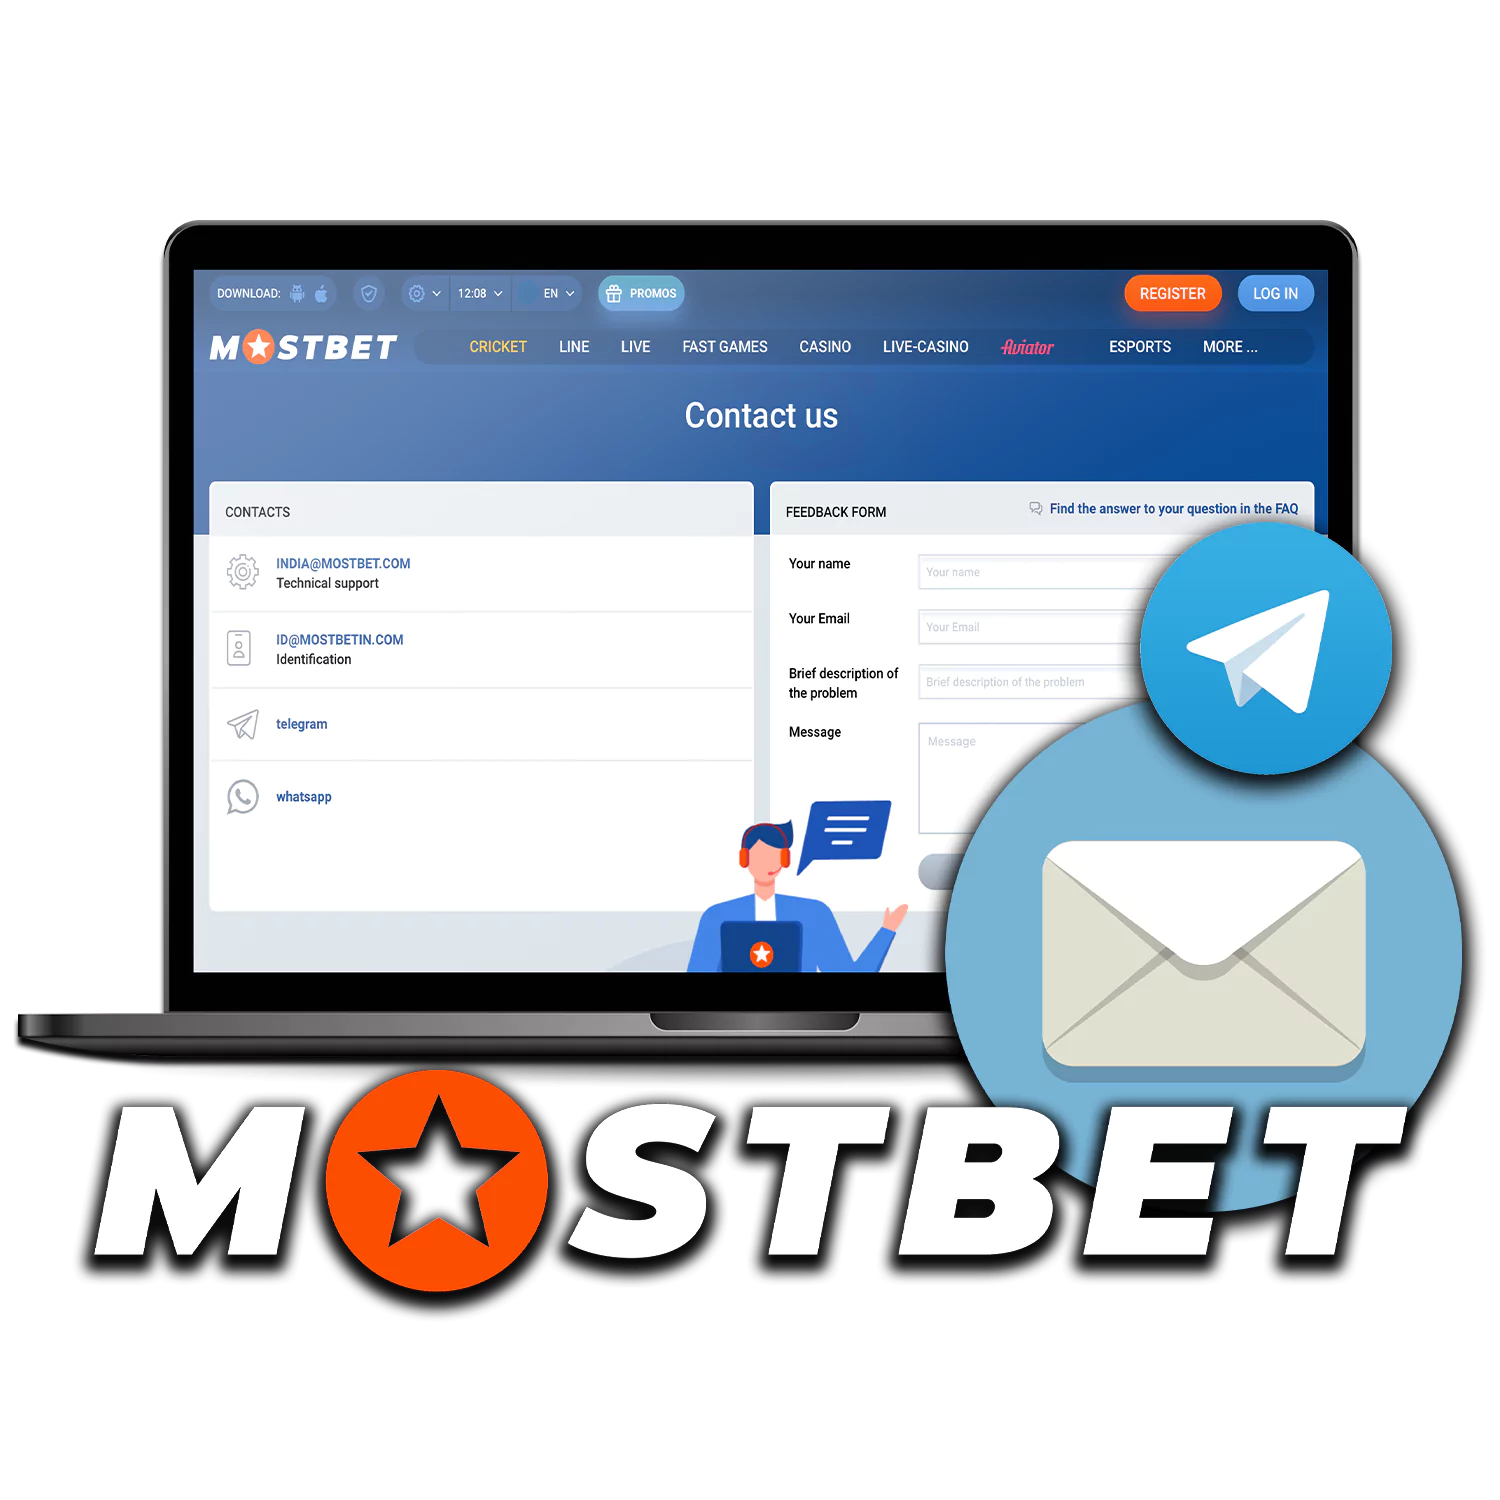 Contacts and ways to contact the team and Mostbet.